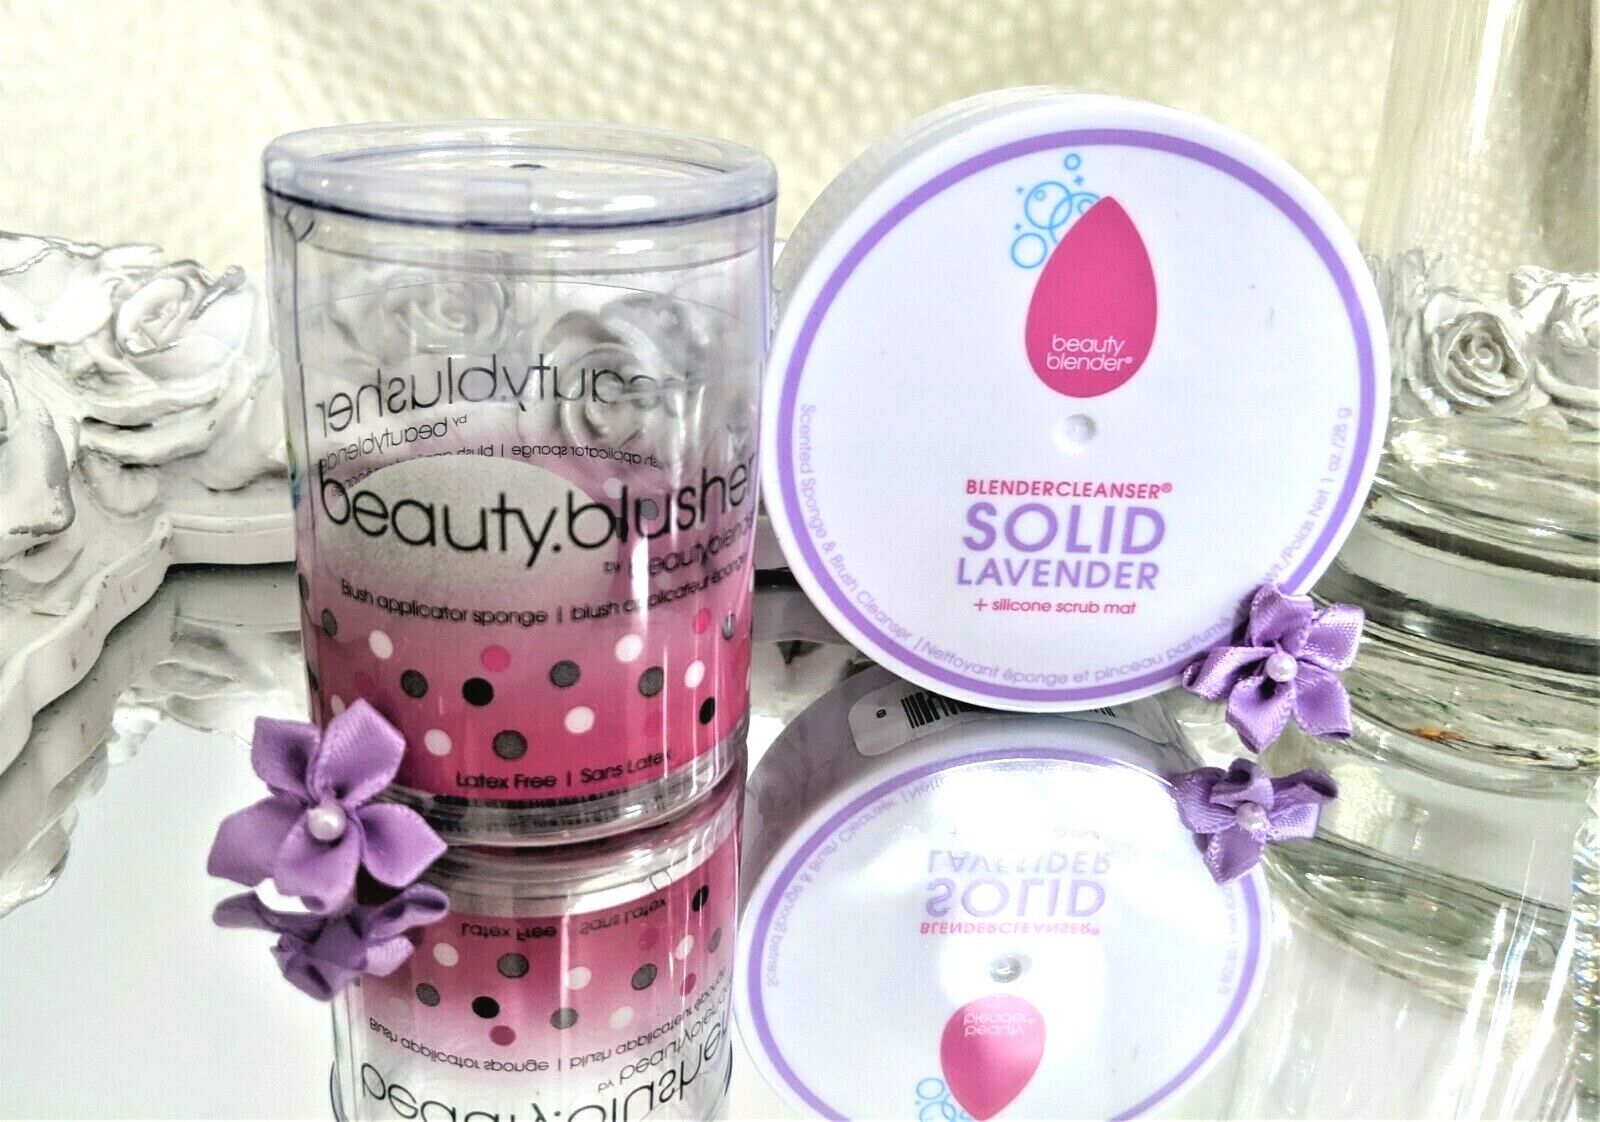 Beauty Blender safety BlenderCleanser Solid oz Now free shipping Lavender Beauty.Blu 1